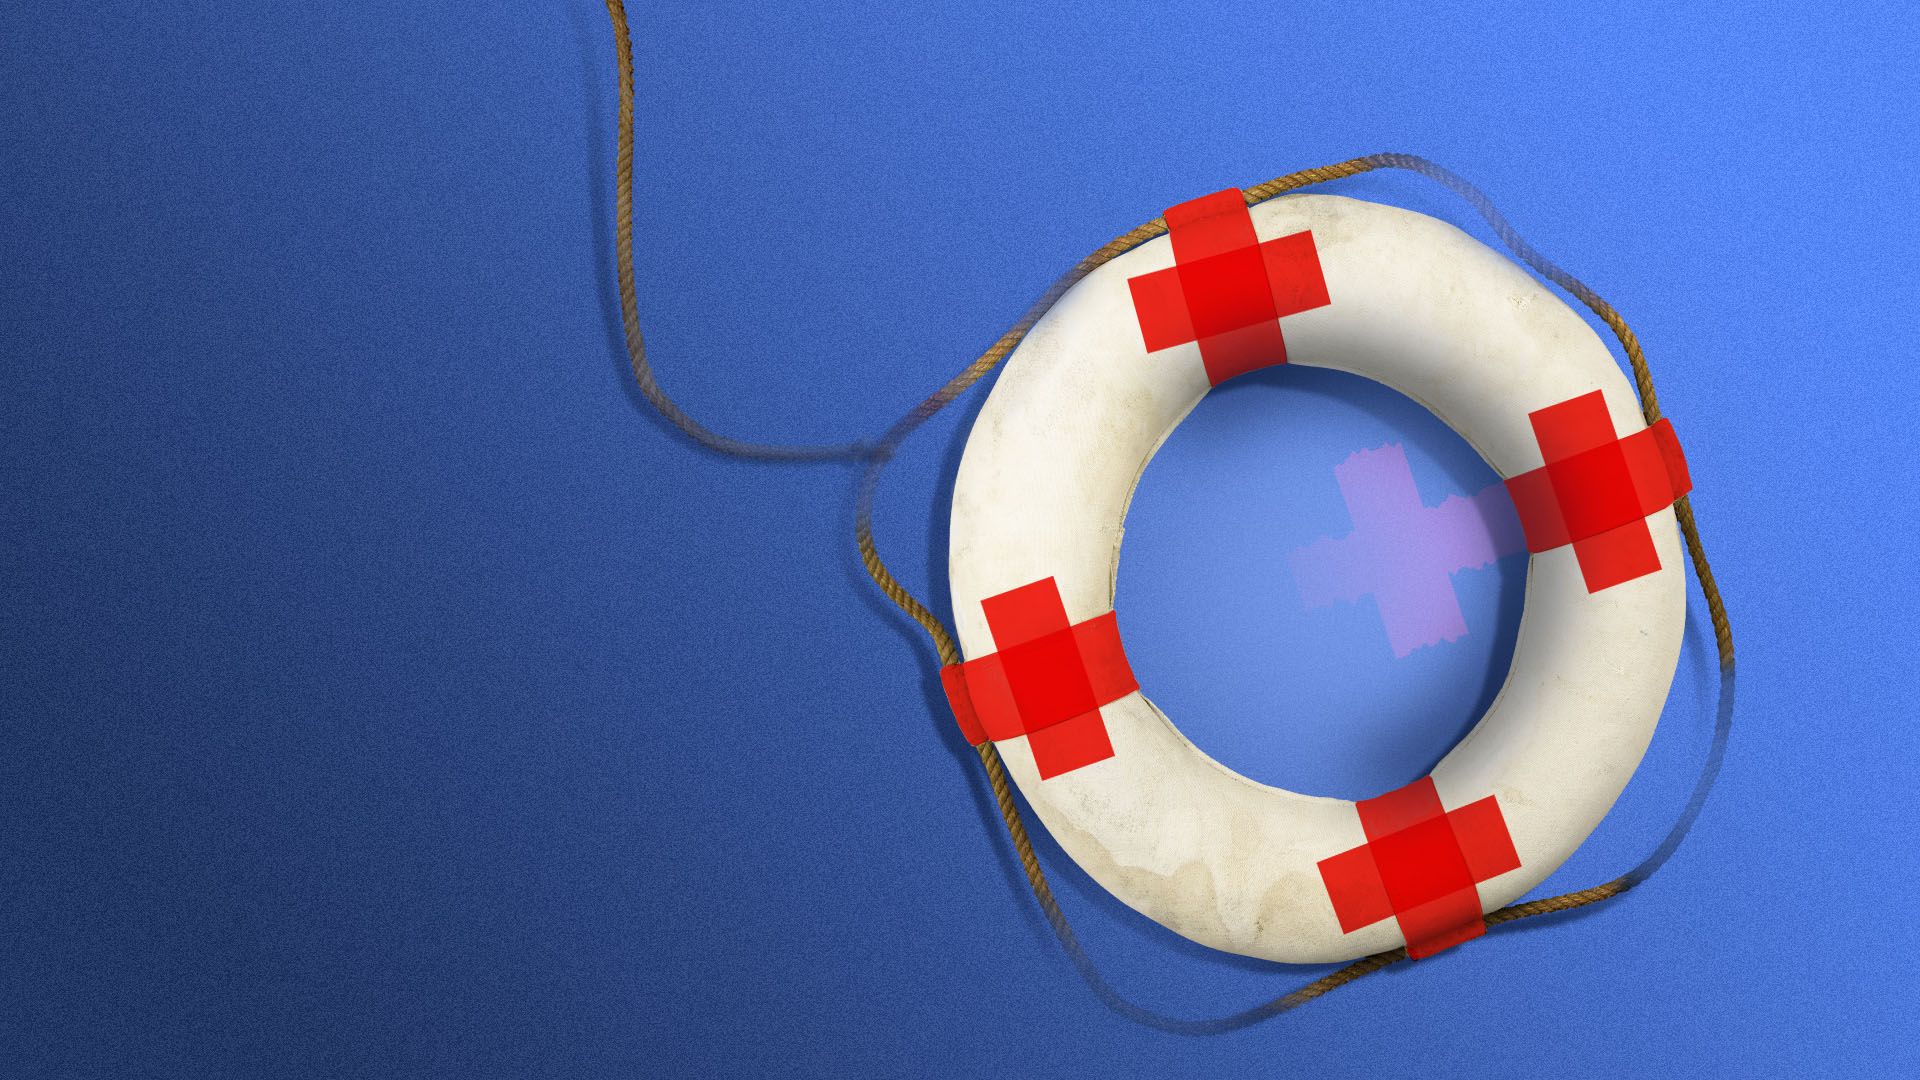 Illustration of a life ring with red cross symbols on it.